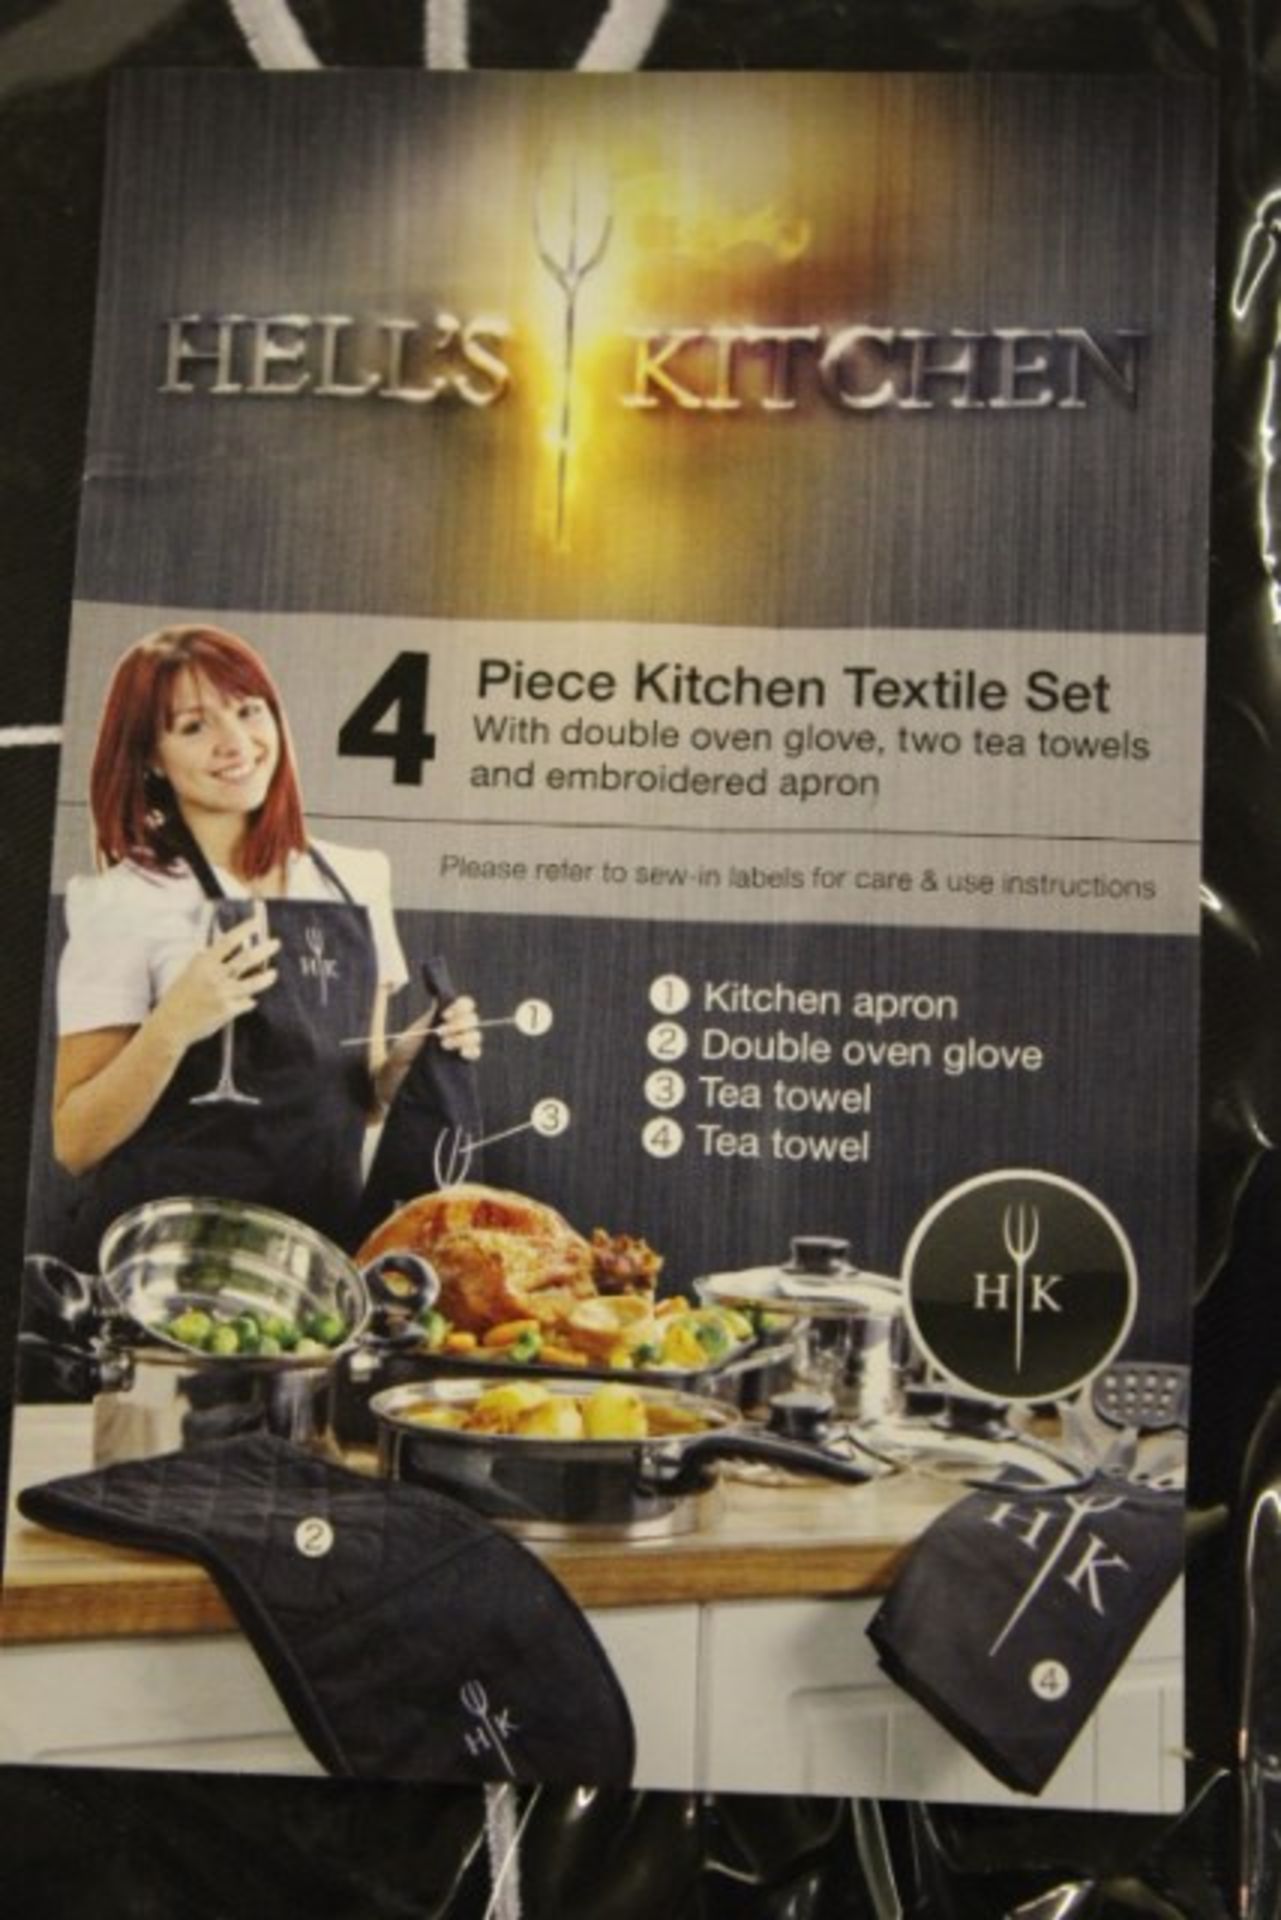 V Brand New Hells Kitchen 4 Piece Kitchen Textile Set inc Double Oven Glove, Two Tea Towels and